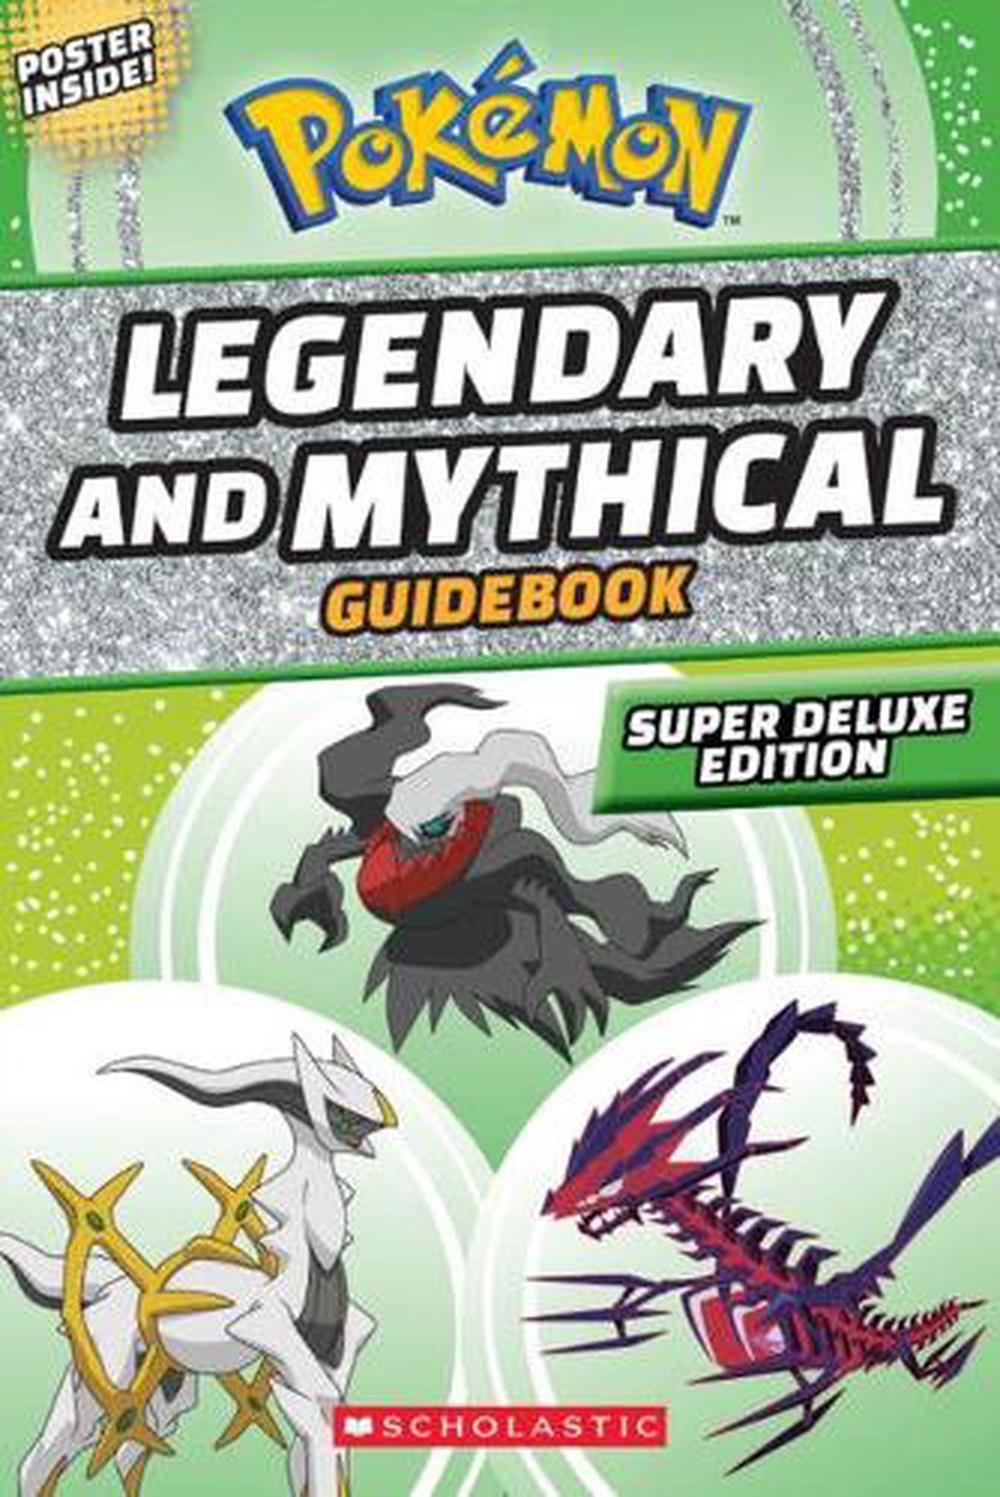 Legendary and Mythical Guidebook Super Deluxe Edition by Simcha Whitehill